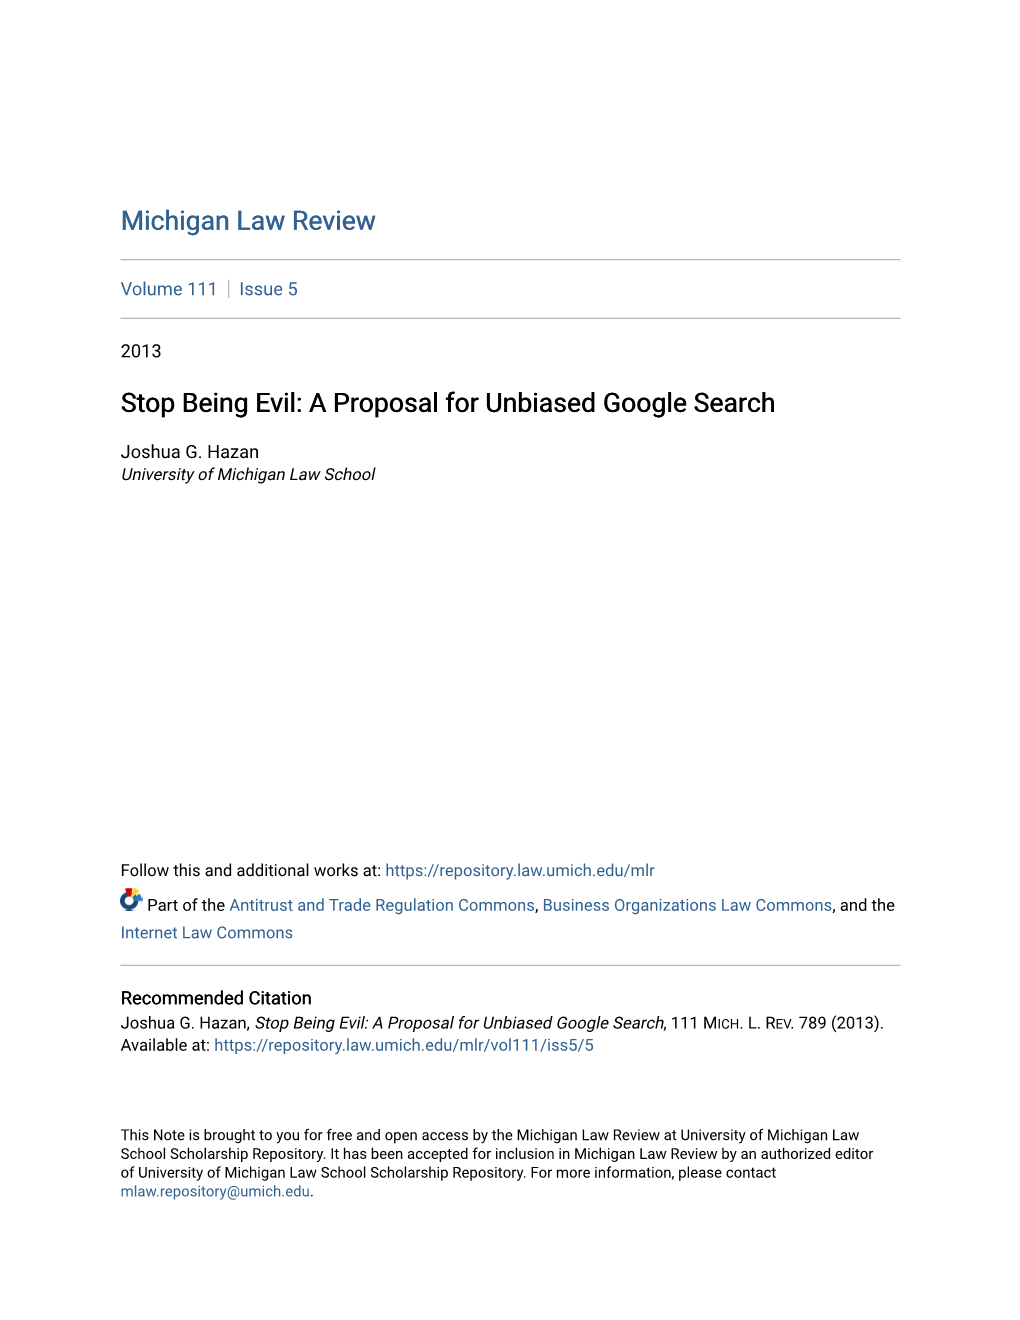 A Proposal for Unbiased Google Search